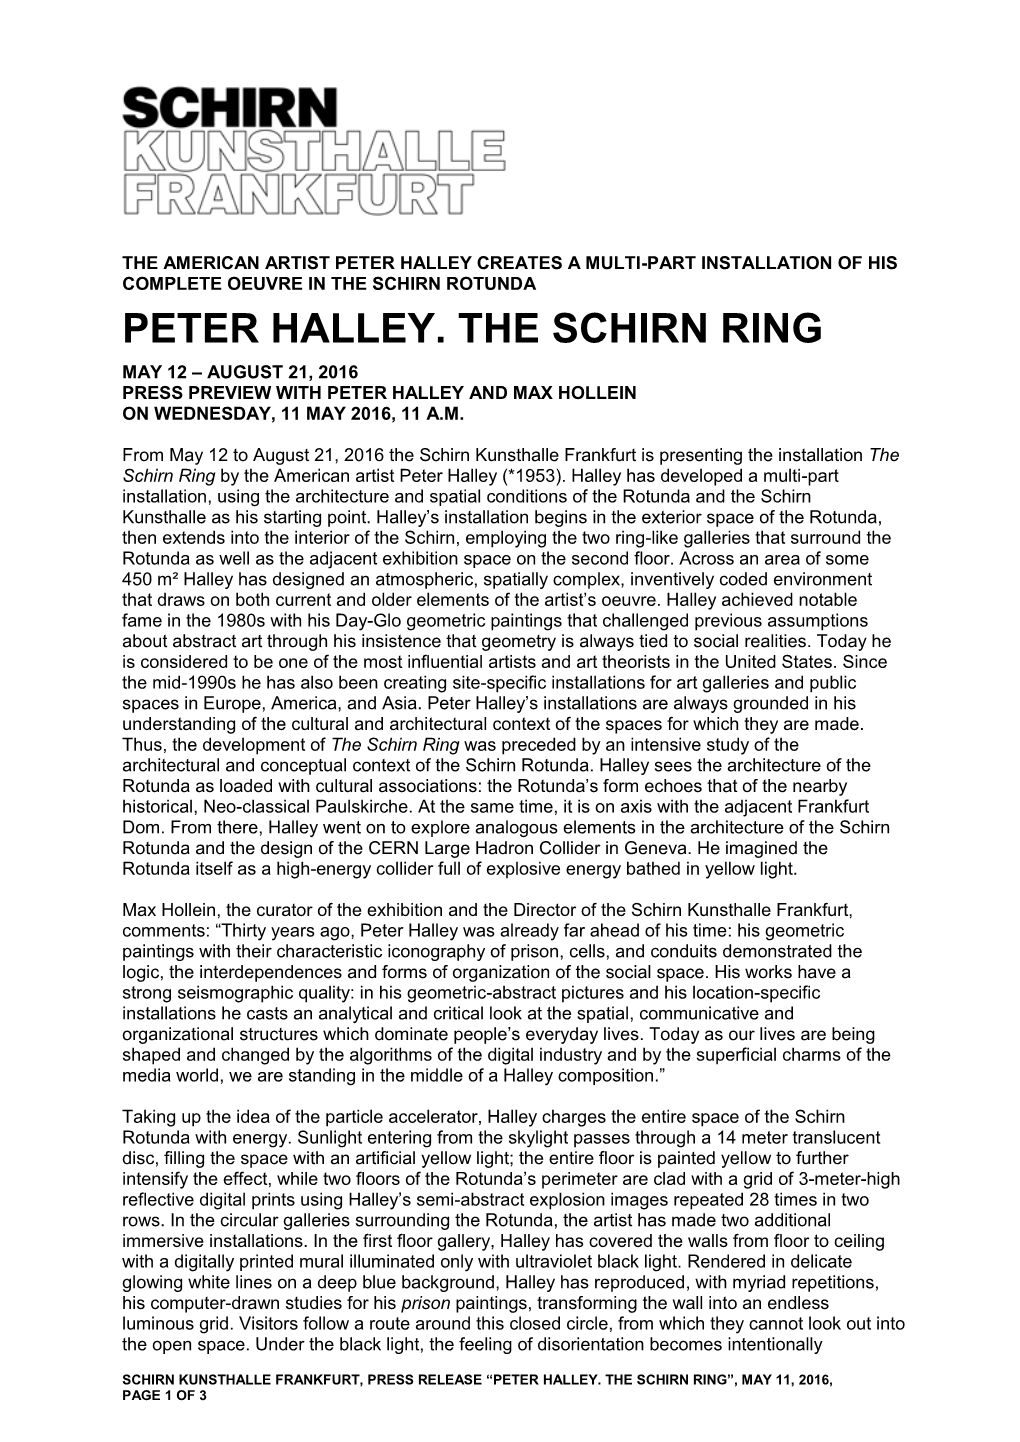 Peter Halley. the Schirn Ring May 12 – August 21, 2016 Press Preview with Peter Halley and Max Hollein on Wednesday, 11 May 2016, 11 A.M